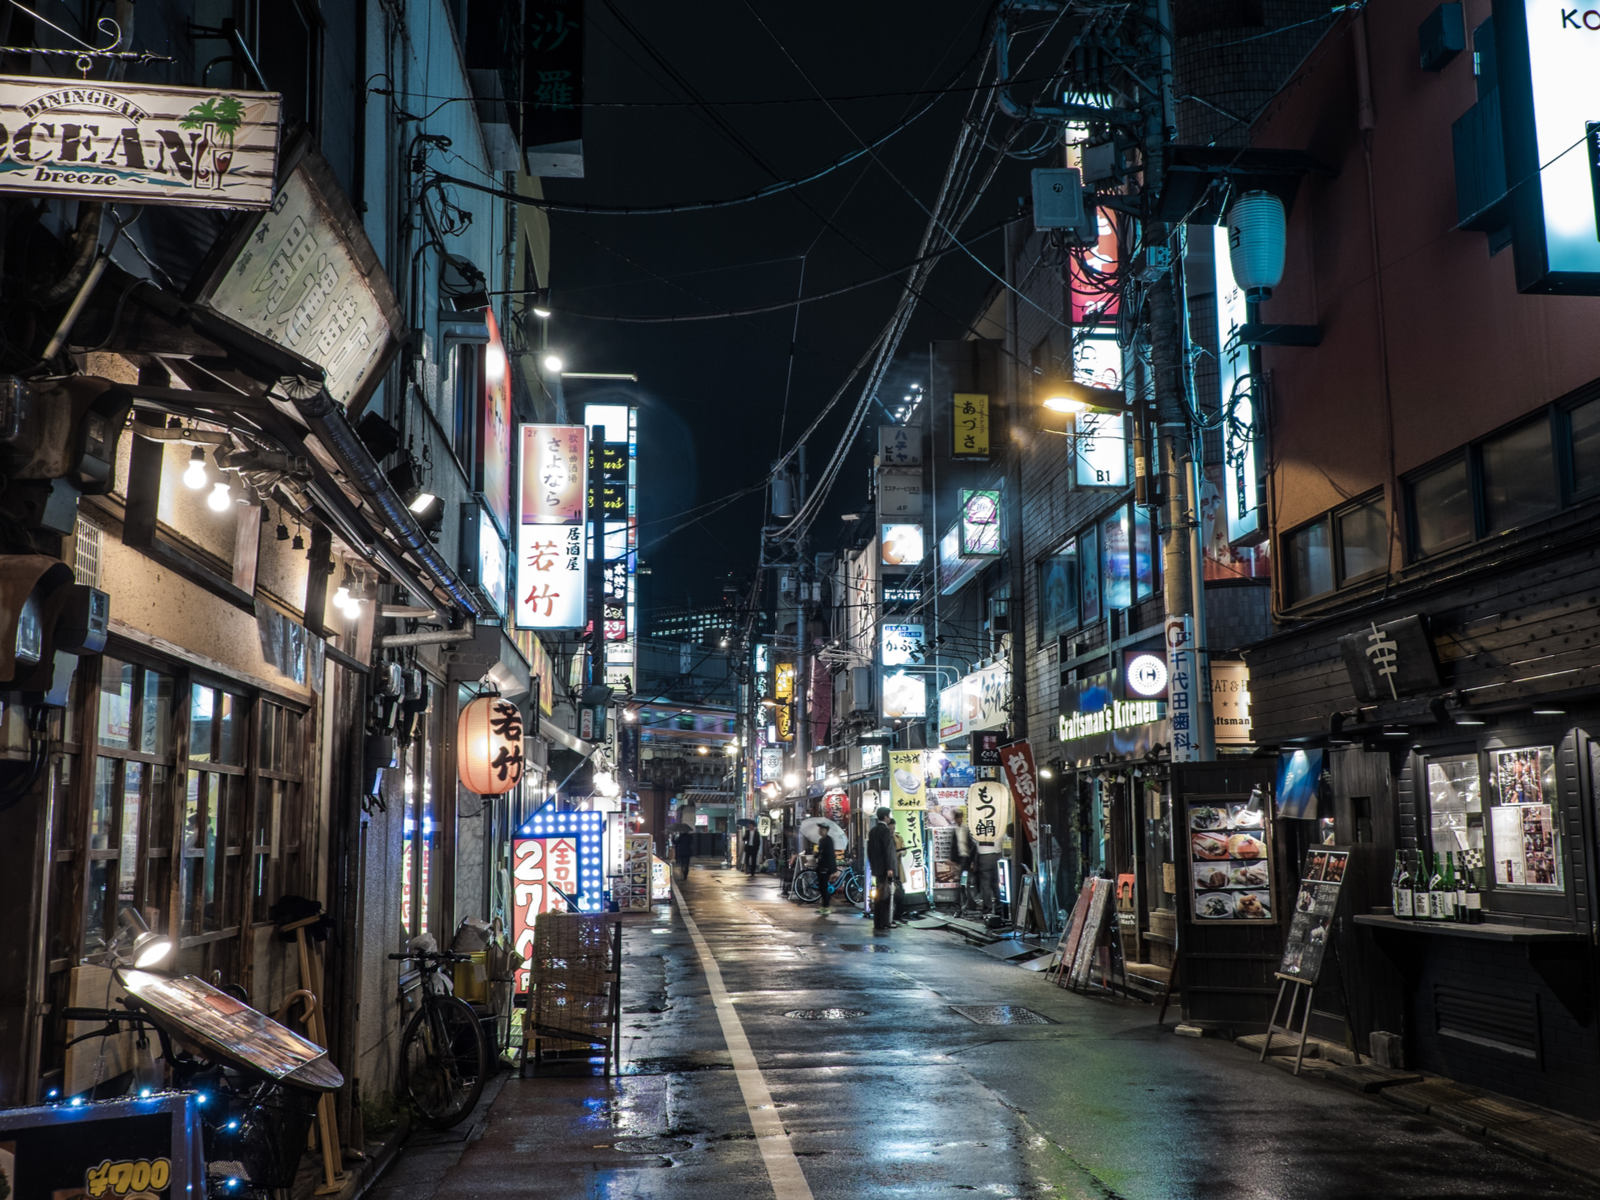 A narrow alley with lots of local bars during the worst time to visit Tokyo